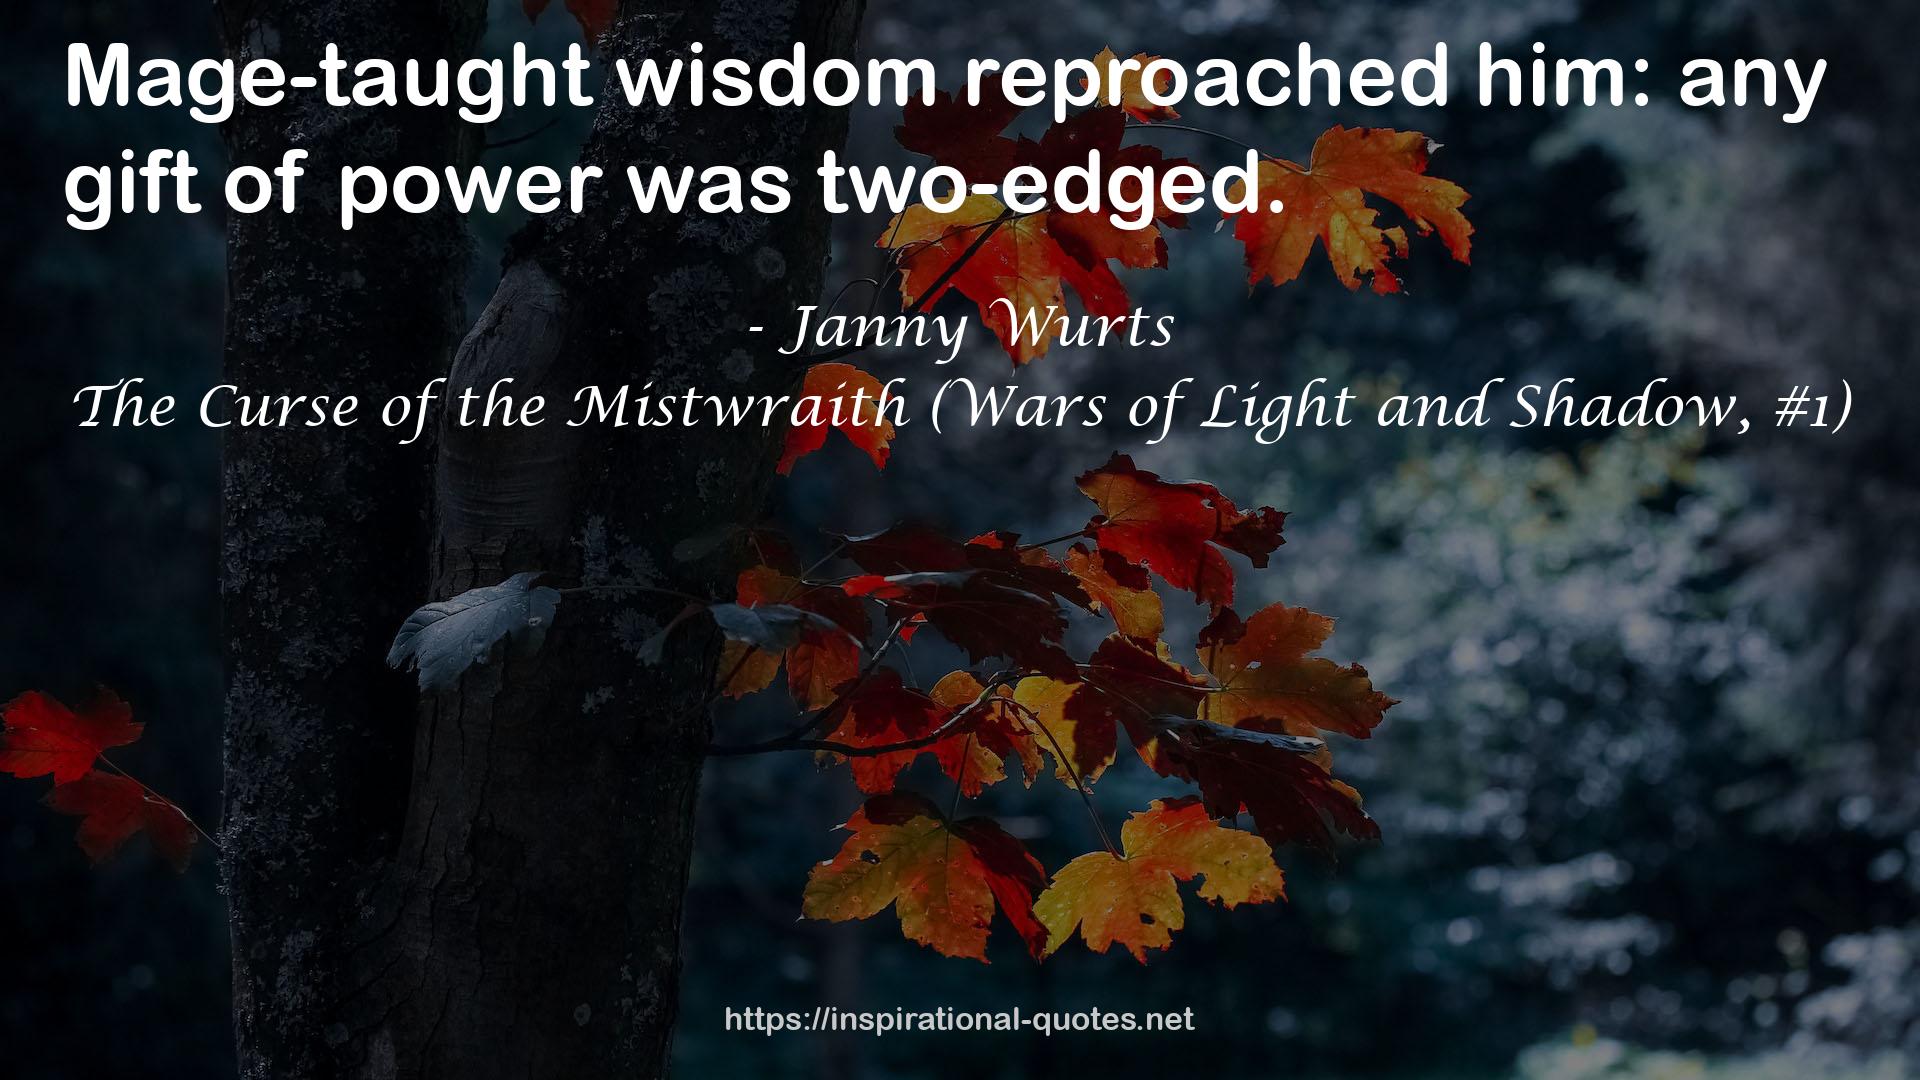 The Curse of the Mistwraith (Wars of Light and Shadow, #1) QUOTES